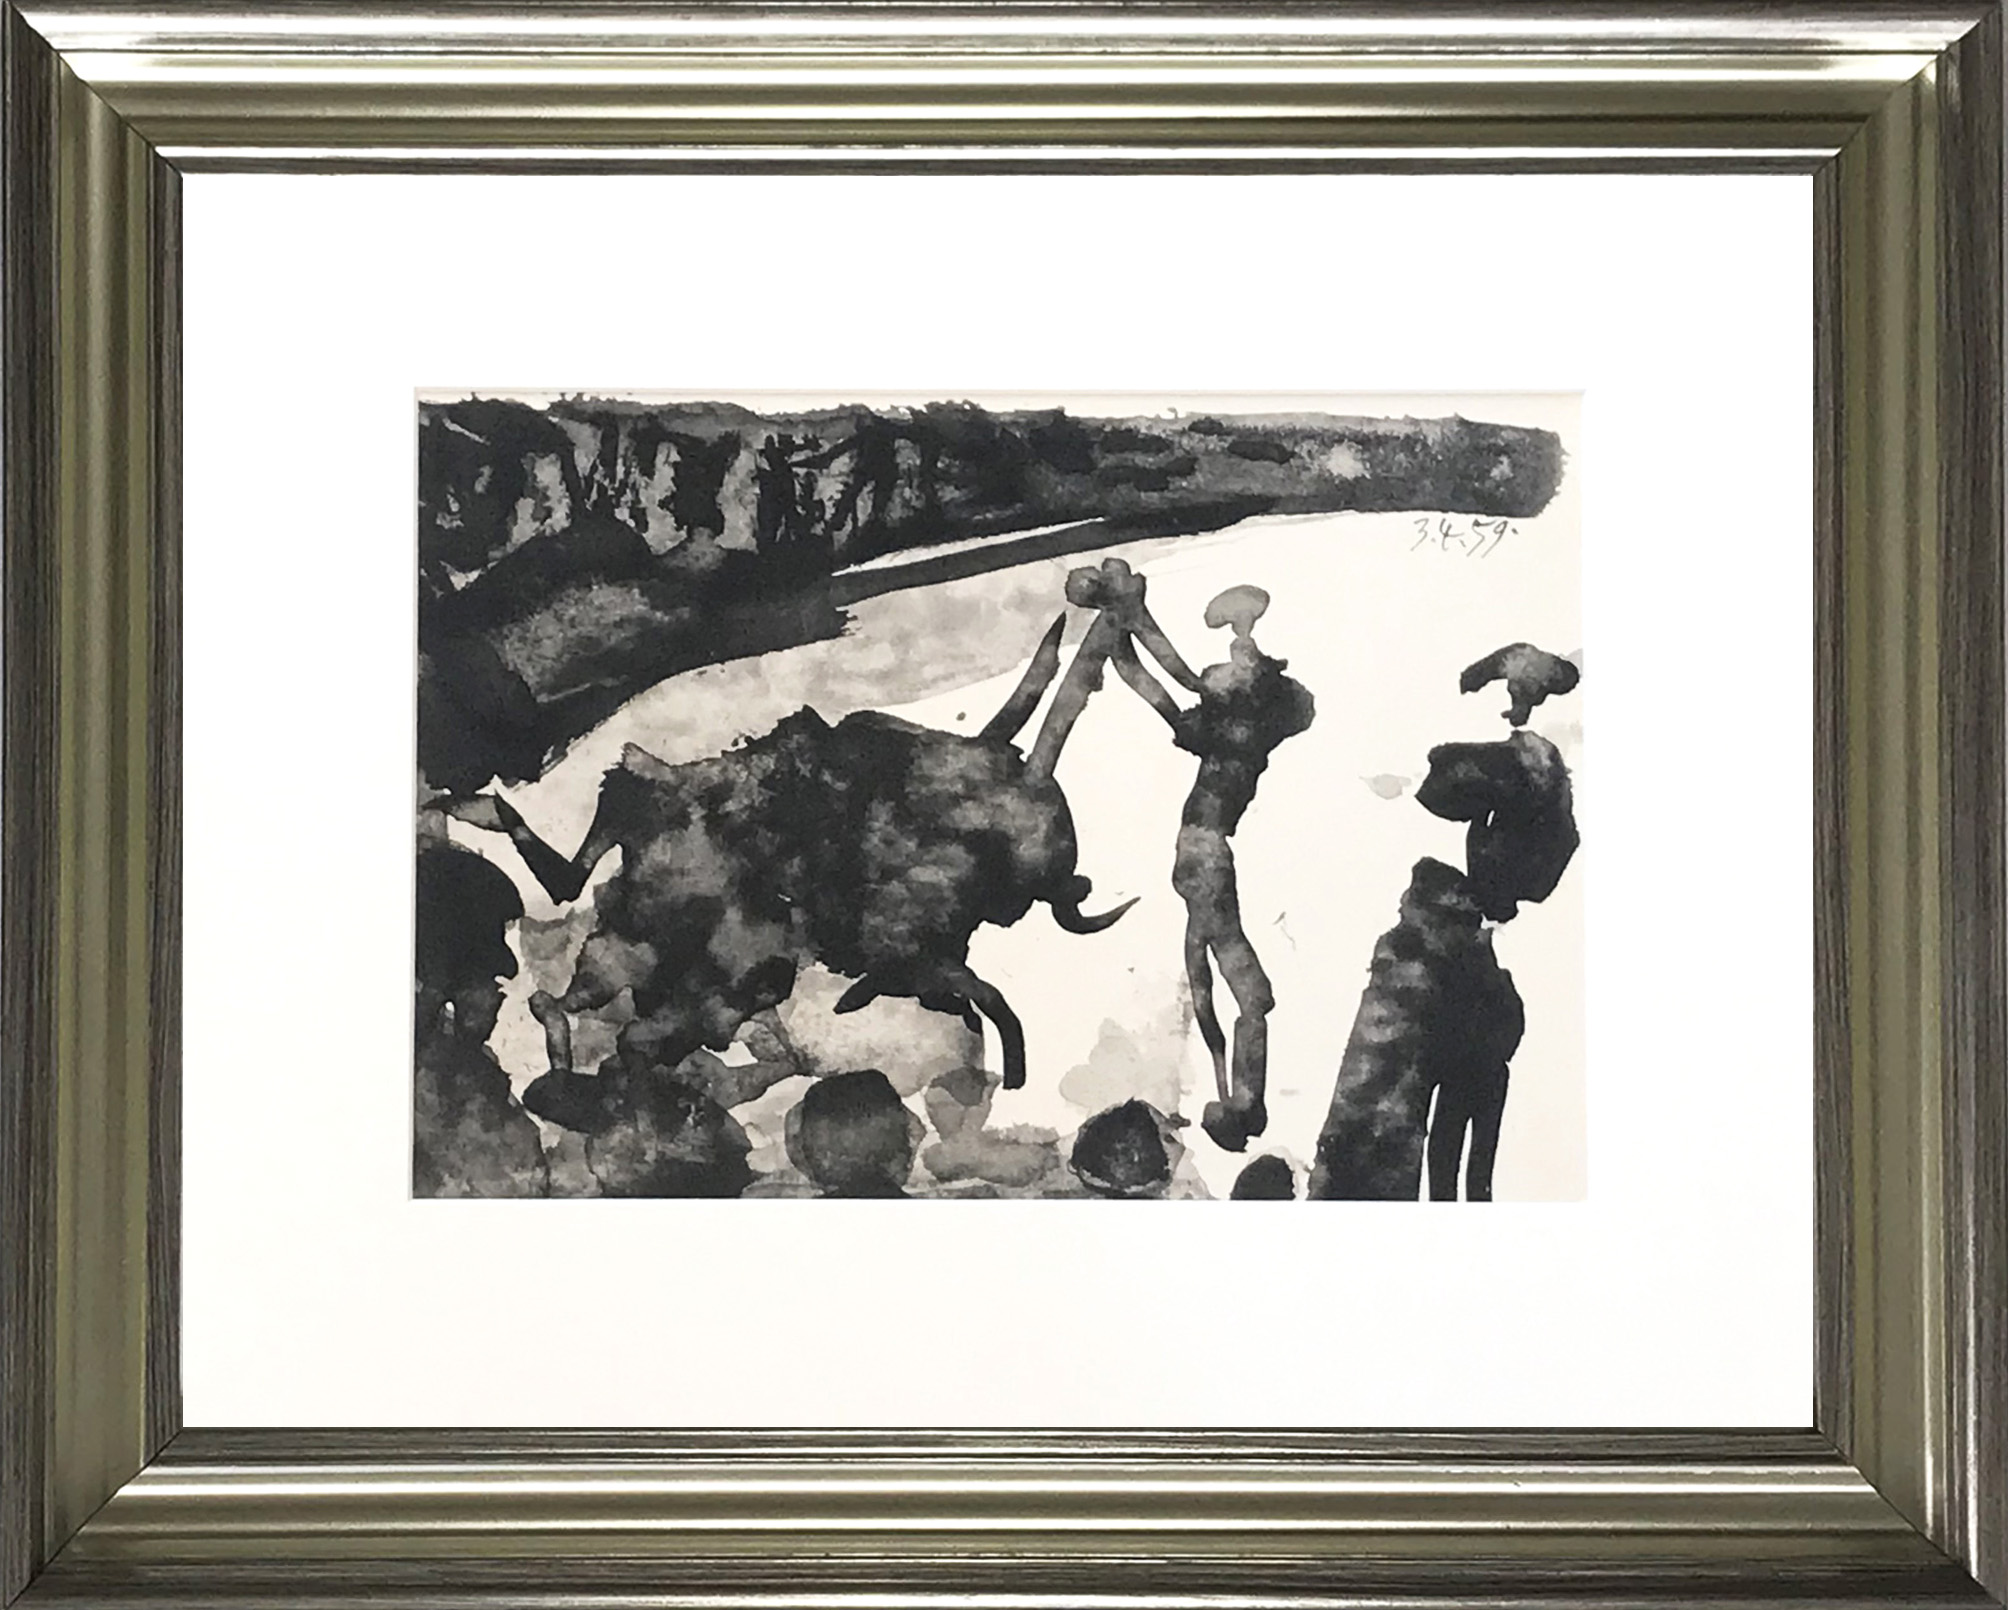 Picasso Toros Y Toreros 1961 framed S4 dated 3/4/59